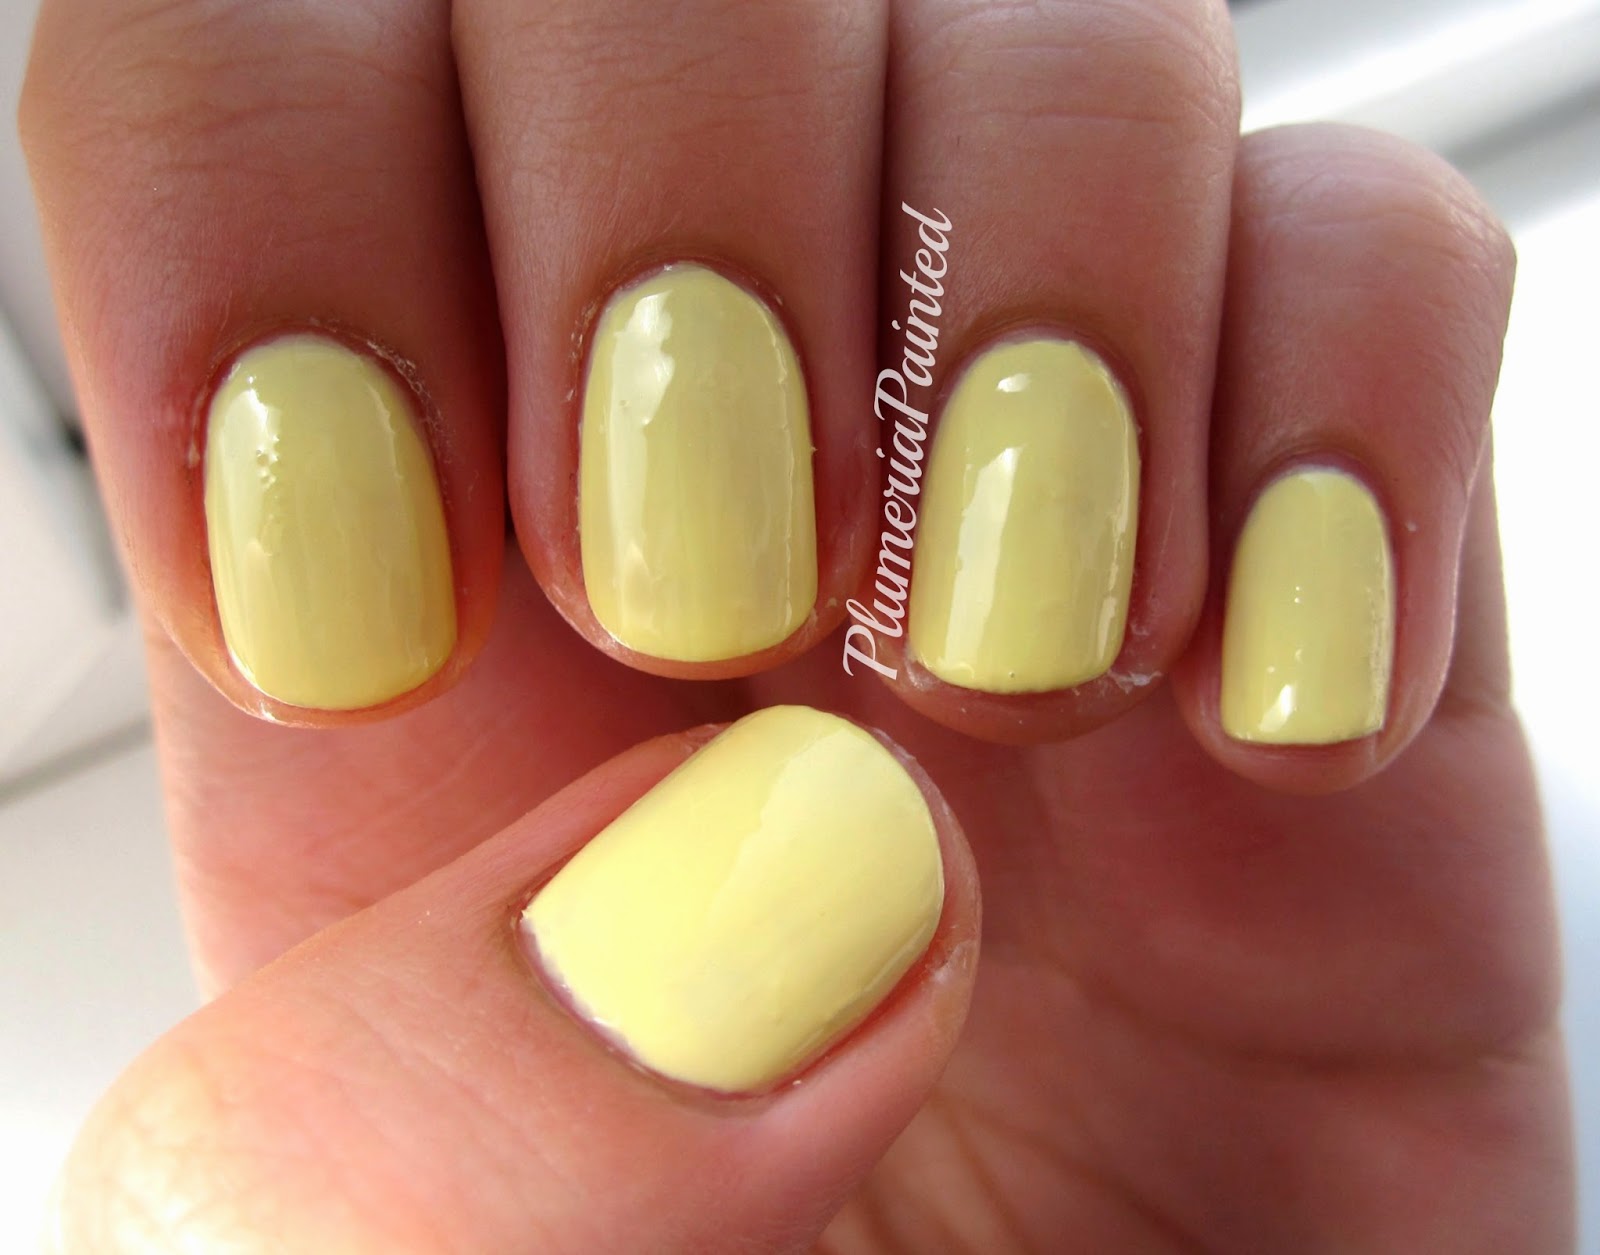 What Does It Mean When Your Fingernails Are Yellow?